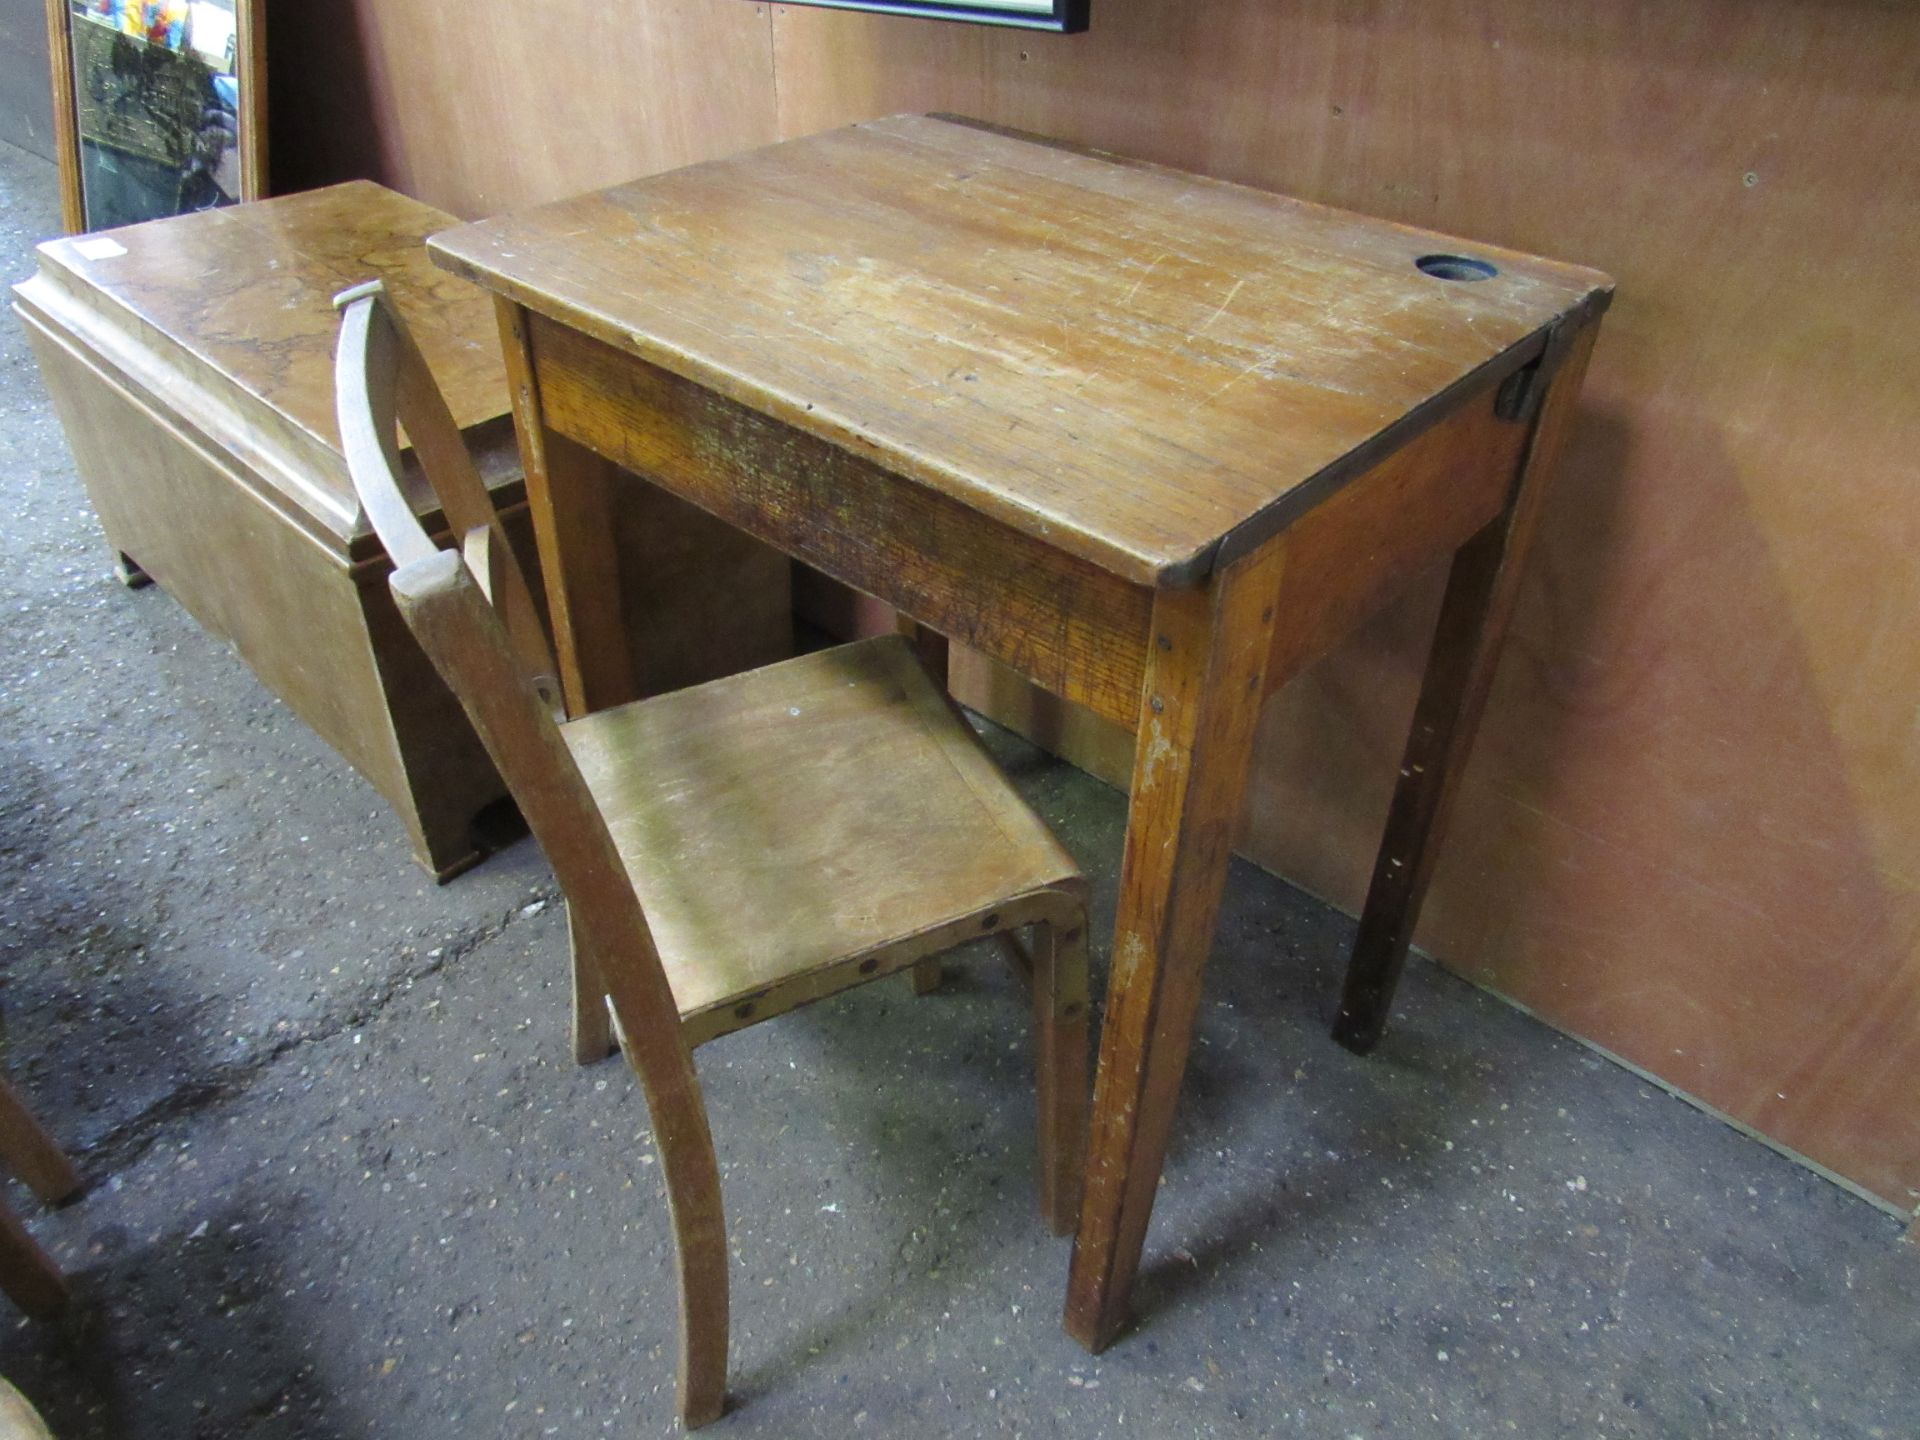 4 x 1950's school chairs by Kingfisher and another, together with a child's school desk. Estimate £